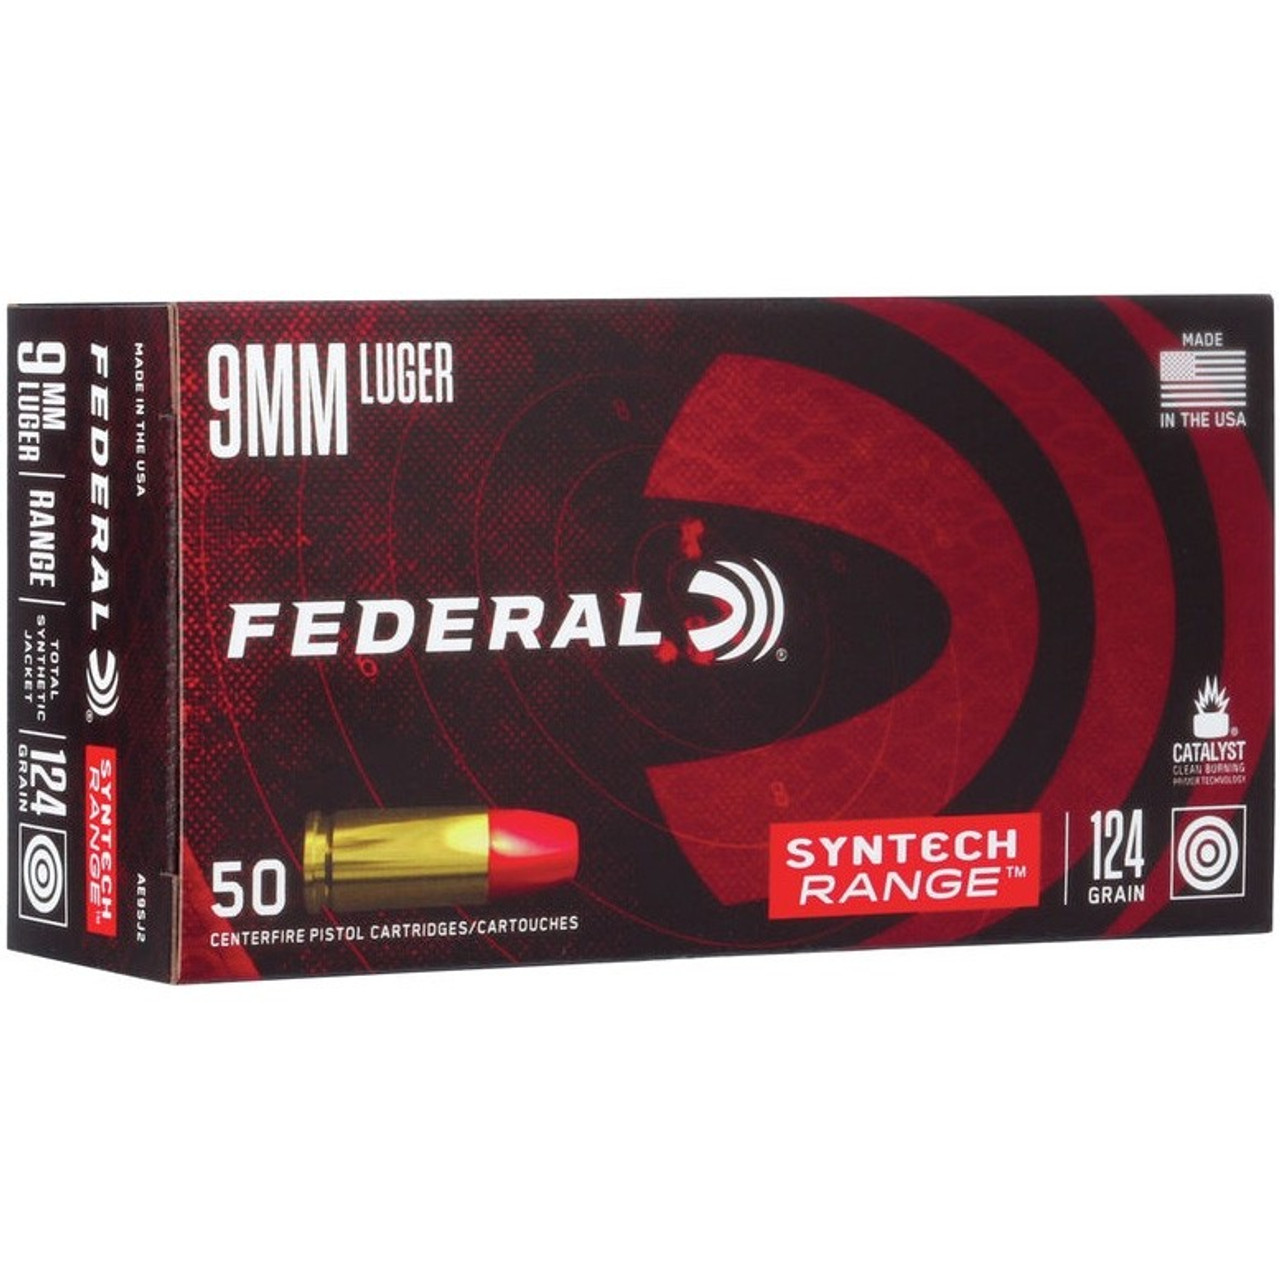 Federal American Eagle 9mm 124gr. TSJ Description:
Syntech ammo from Federal is new technology revolutionizing traditional copper jacketed ammuniton. Federal's Syntech is a lead core projectile coated entirely with Syntech polymer. Its TSJ minimizes friction on the barrel's rifling and the amount of copper and lead deposited in the barrel, providing for cleaner shooting and prolonged barrel life.

50 rounds per box